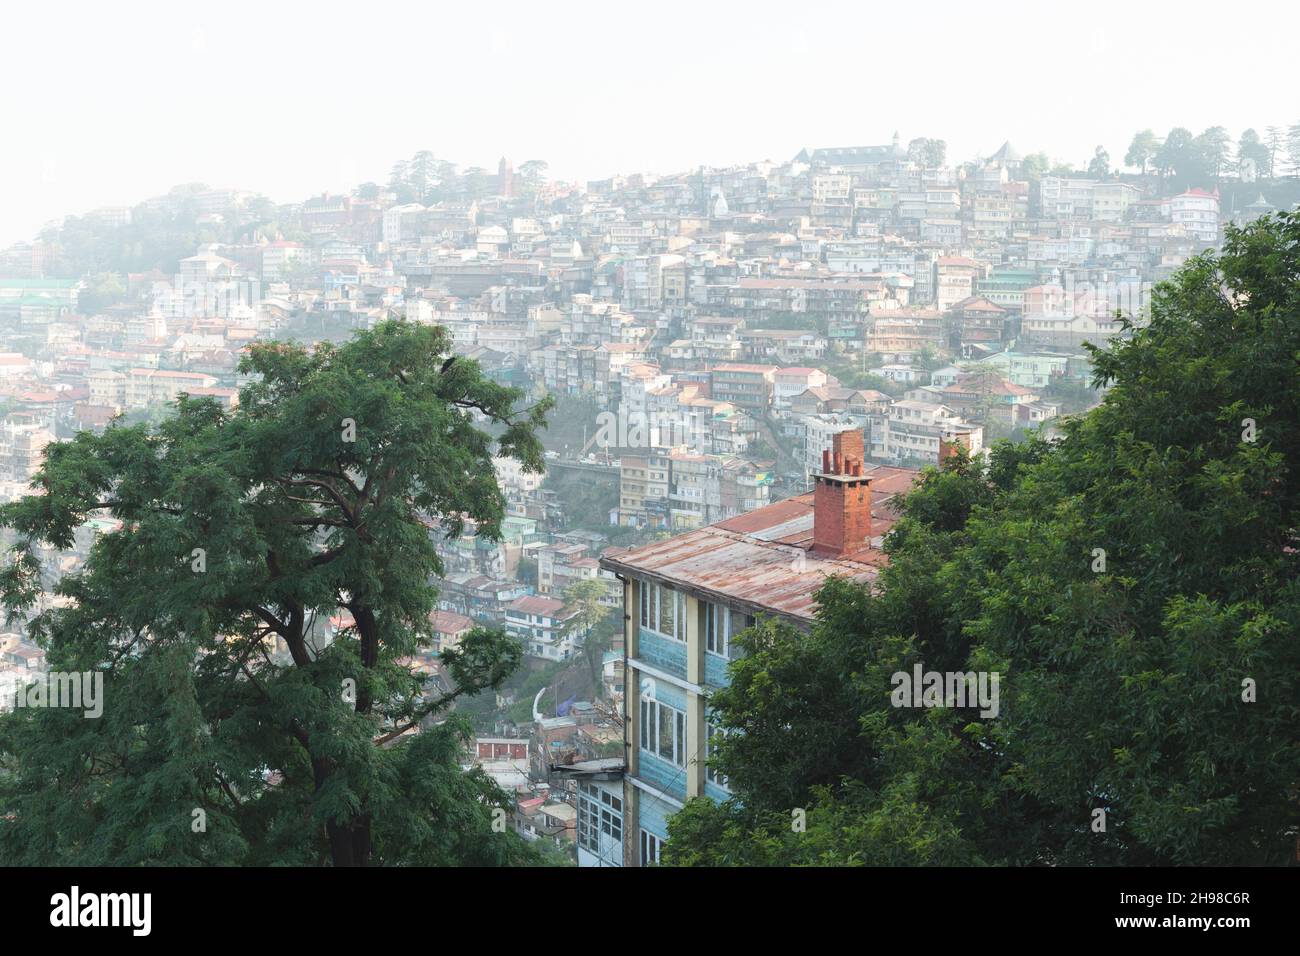 View of Shimla city in Indian Himalayas the capital of Indian state Himachal Pradesh. Shimla, Himachal Prades, India. Landscape photography Stock Photo